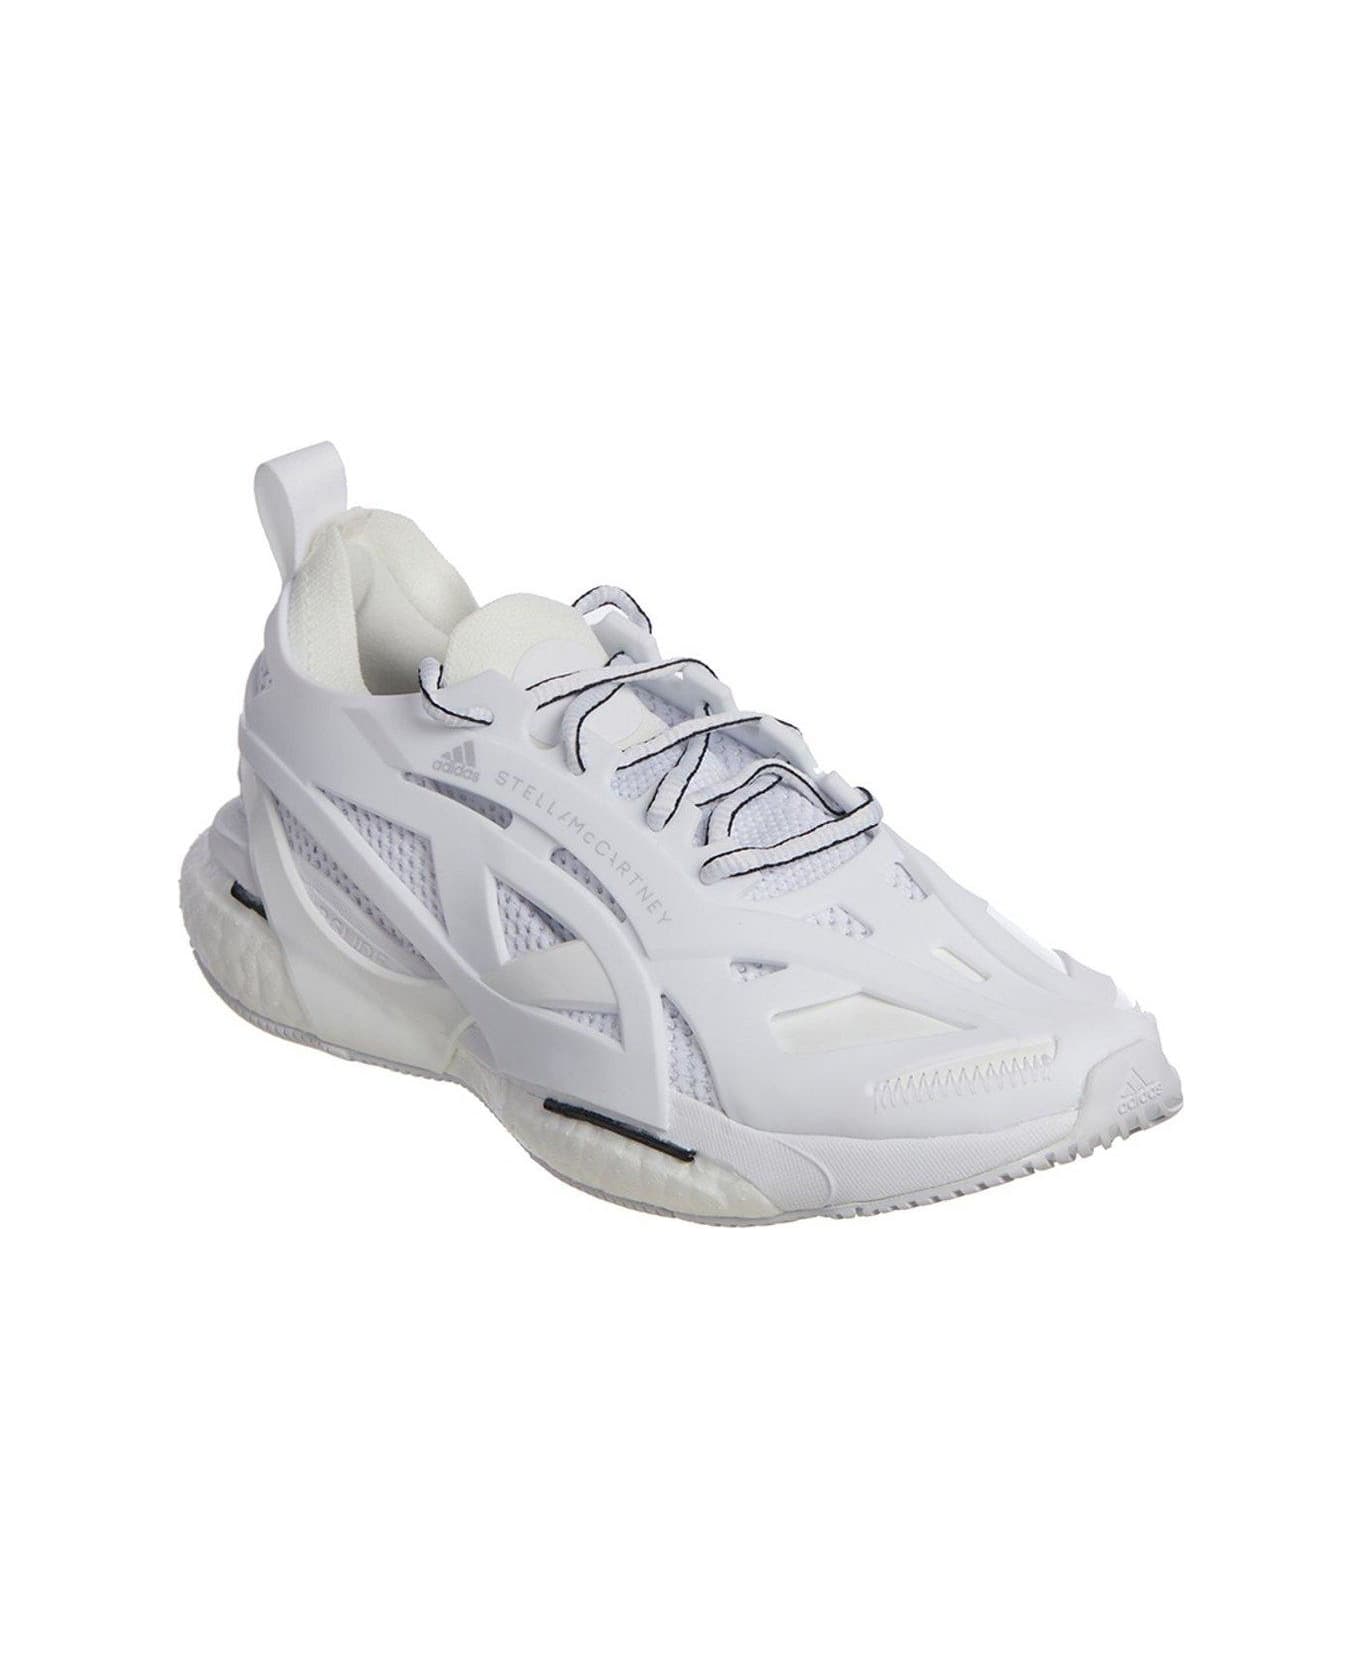 Adidas by Stella McCartney Solarglide Sneakers - WHITE